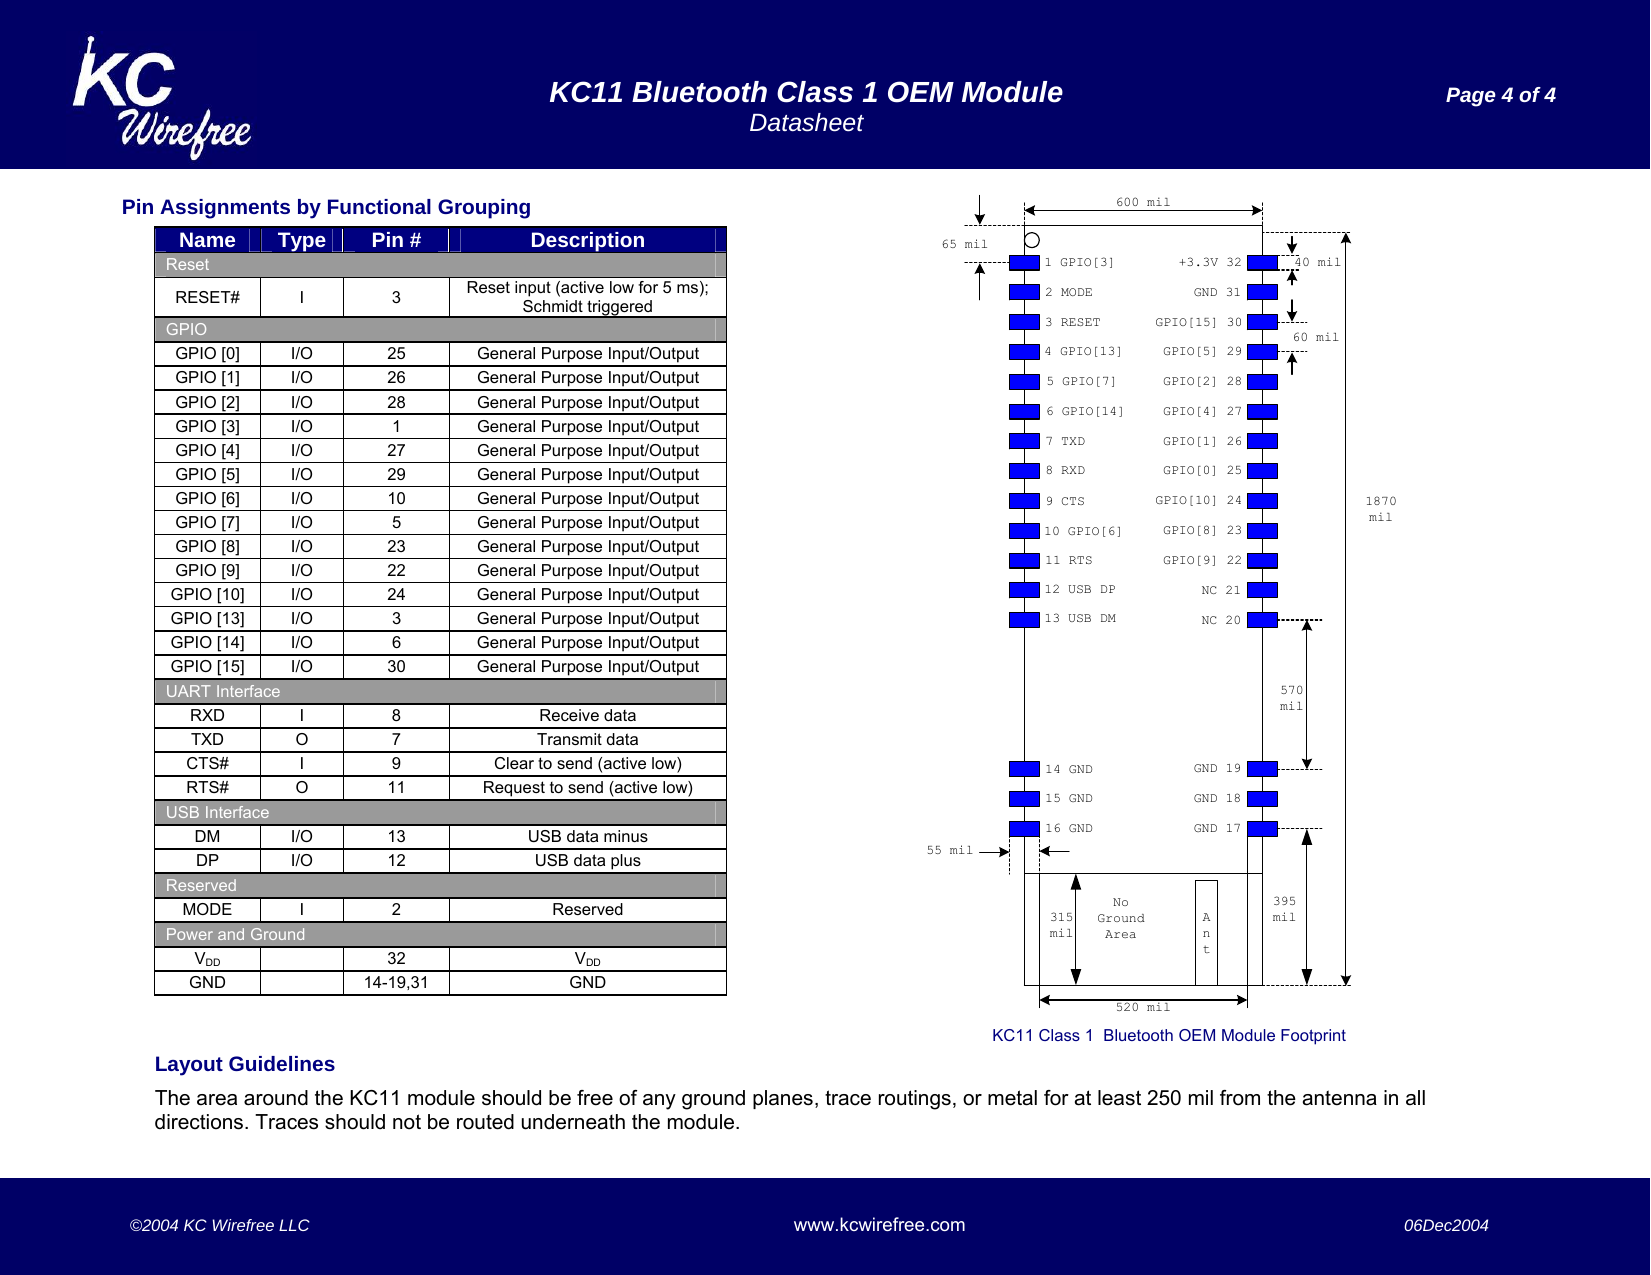   KC11 Bluetooth Class 1 OEM Module  Page 4 of 4  Datasheet    ©2004 KC Wirefree LLC www.kcwirefree.com  06Dec2004   55 mil520 mil600 mil1870mil40 mil60 mil65 mil395mil570mil1 GPIO[3] +3.3V 32GND 31GPIO[15] 30GPIO[5] 29GPIO[2] 28GPIO[4] 27GPIO[1] 26GPIO[0] 25GPIO[10] 24GPIO[8] 23GPIO[9] 22NC 21NC 20GND 19GND 18GND 1716 GND15 GND14 GND13 USB DM12 USB DP11 RTS10 GPIO[6]9 CTS8 RXD7 TXD6 GPIO[14]5 GPIO[7]4 GPIO[13]3 RESET2 MODENoGroundAreaAnt315milKC11 Class 1  Bluetooth OEM Module Footprint Pin Assignments by Functional Grouping                                                             Name  Type  Pin #  Description Reset RESET# I  3  Reset input (active low for 5 ms); Schmidt triggered GPIO GPIO [0]  I/O  25  General Purpose Input/Output GPIO [1]  I/O  26  General Purpose Input/Output GPIO [2]  I/O  28  General Purpose Input/Output GPIO [3]  I/O  1  General Purpose Input/Output GPIO [4]  I/O  27  General Purpose Input/Output GPIO [5]  I/O  29  General Purpose Input/Output GPIO [6]  I/O  10  General Purpose Input/Output GPIO [7]  I/O  5  General Purpose Input/Output GPIO [8]  I/O  23  General Purpose Input/Output GPIO [9]  I/O  22  General Purpose Input/Output GPIO [10]  I/O  24  General Purpose Input/Output GPIO [13]  I/O  3  General Purpose Input/Output GPIO [14]  I/O  6  General Purpose Input/Output GPIO [15]  I/O  30  General Purpose Input/Output UART Interface RXD I  8  Receive data TXD O  7  Transmit data CTS#  I  9  Clear to send (active low) RTS#  O  11  Request to send (active low) USB Interface DM  I/O  13  USB data minus DP  I/O  12  USB data plus Reserved MODE I  2  Reserved Power and Ground VDD   32  VDD GND  14-19,31  GND Layout Guidelines The area around the KC11 module should be free of any ground planes, trace routings, or metal for at least 250 mil from the antenna in all directions. Traces should not be routed underneath the module. 